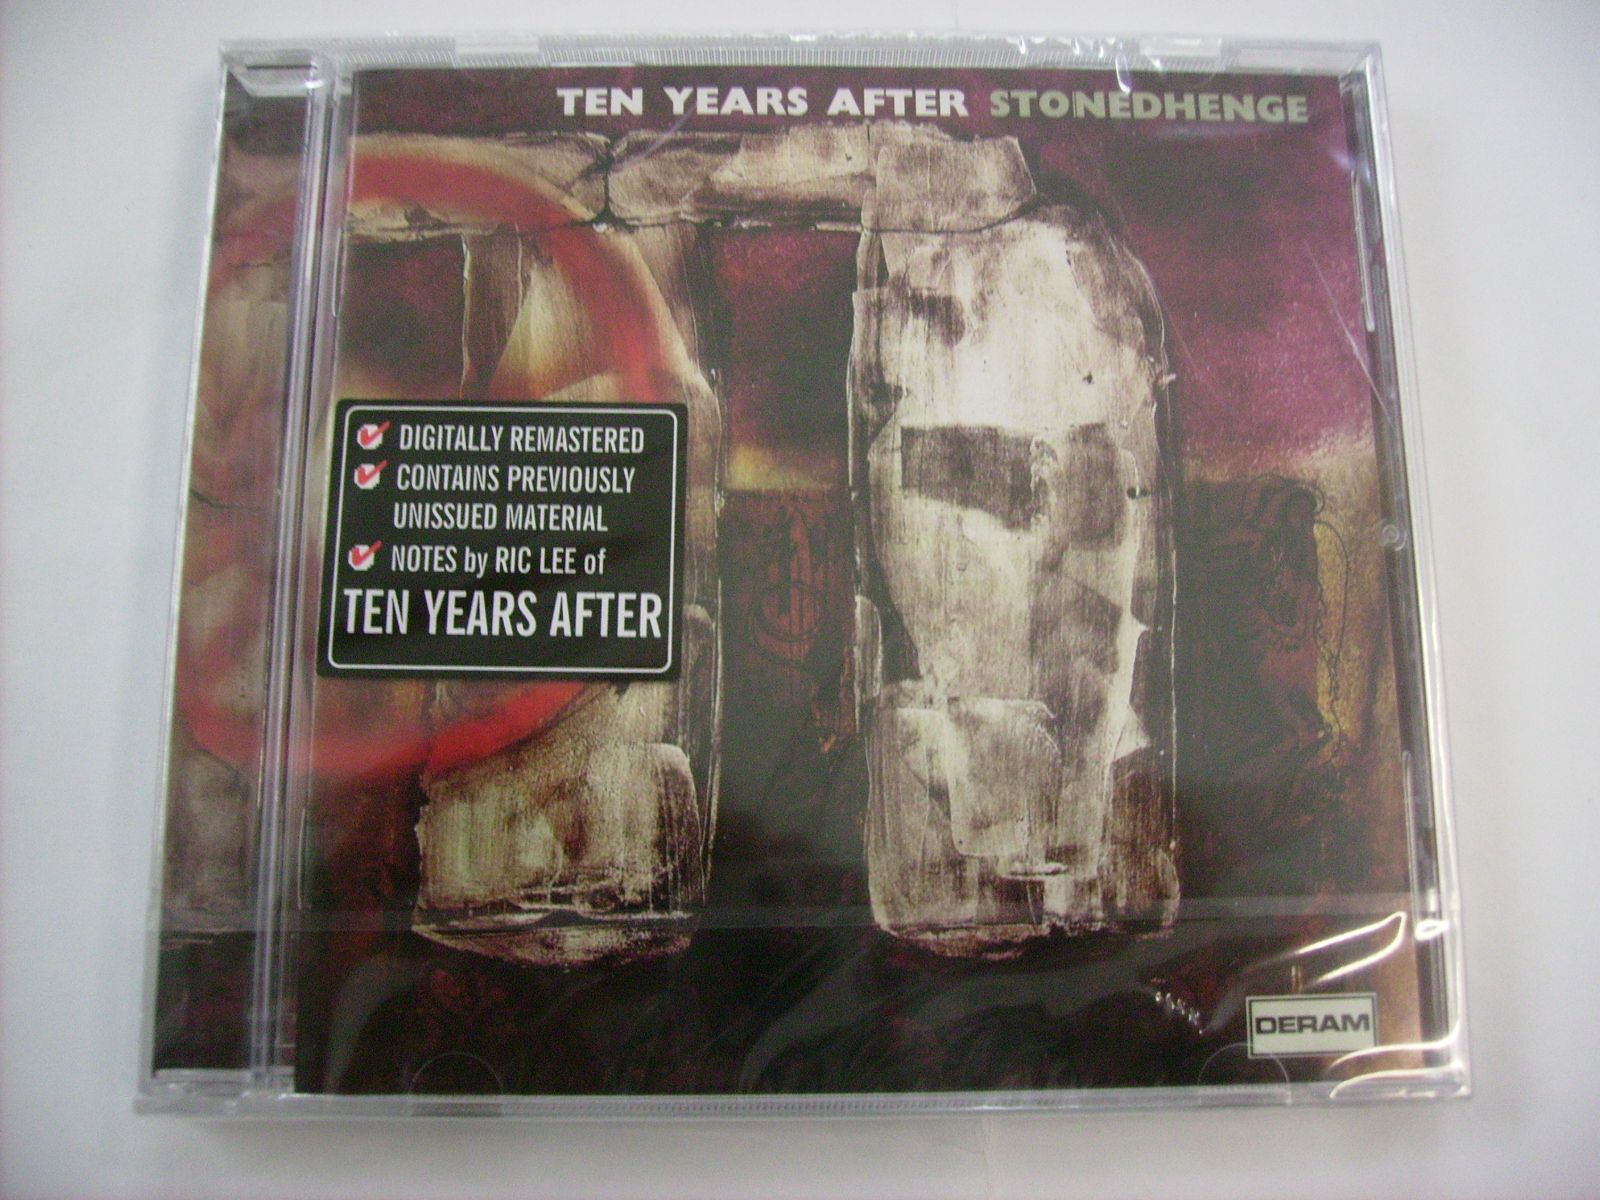 Ten Years After Stonehenge Records, LPs, Vinyl and CDs - MusicStack